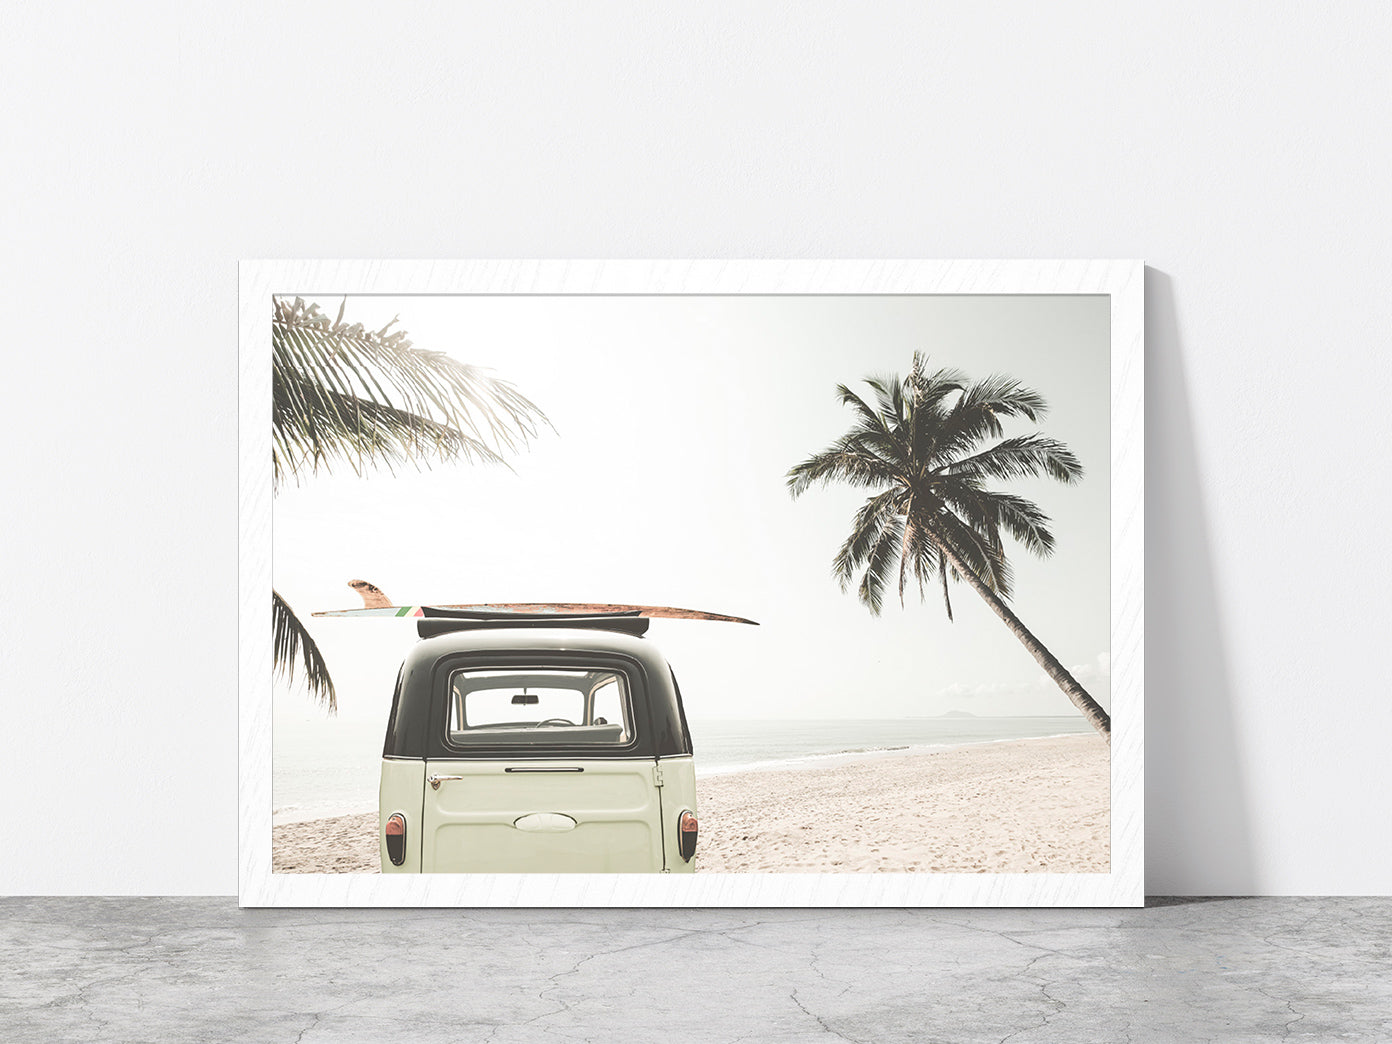 Surf Board on Vintage Van & Palm Tree near Sea Glass Framed Wall Art, Ready to Hang Quality Print Without White Border White